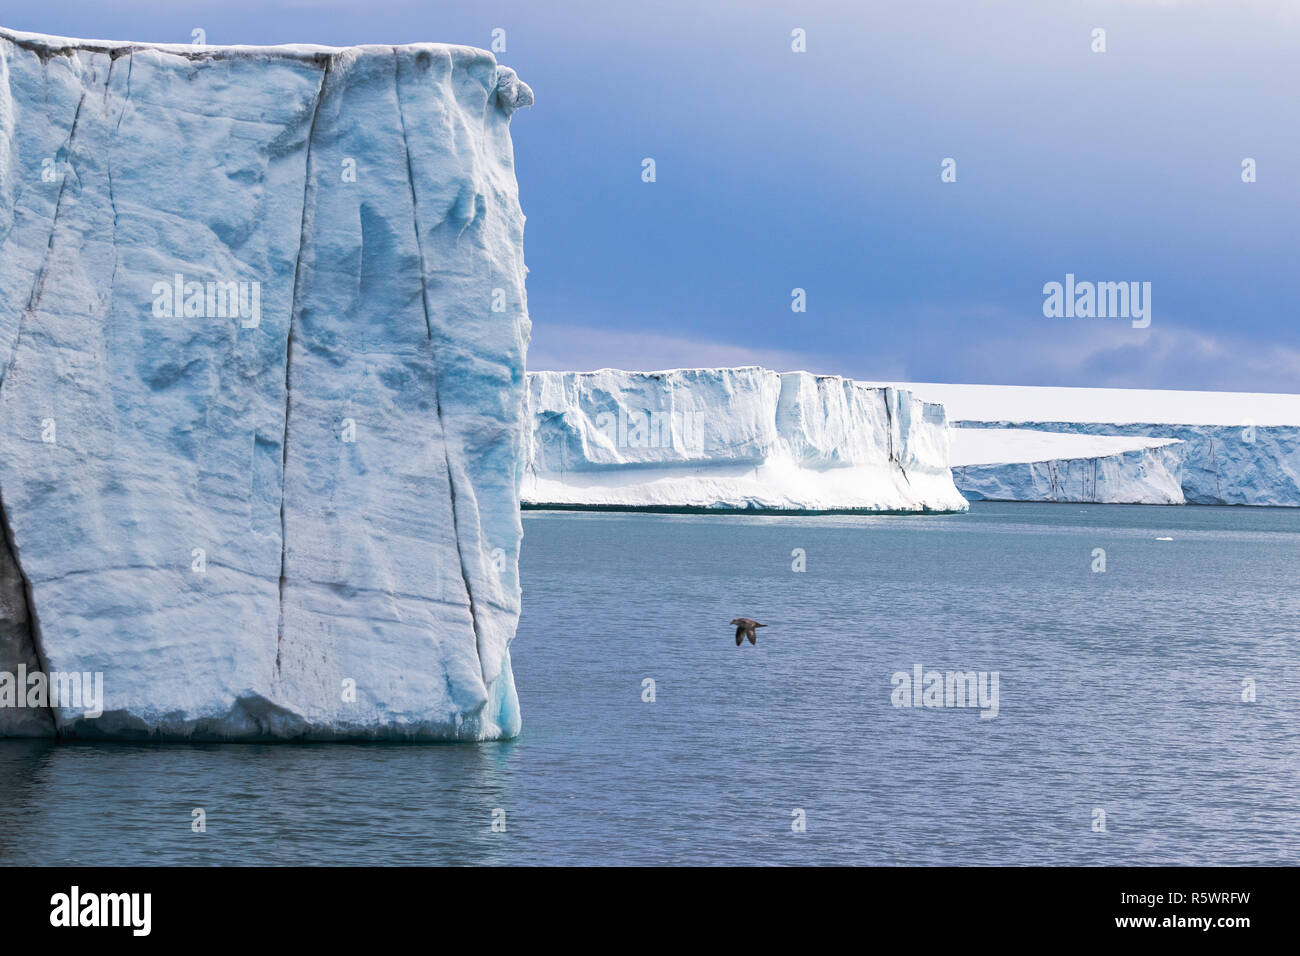 Glacier and sea, Negribreen, Eastern coast of Spitsbergen, an island in the Svalbard Archipelago, Norway. Stock Photo